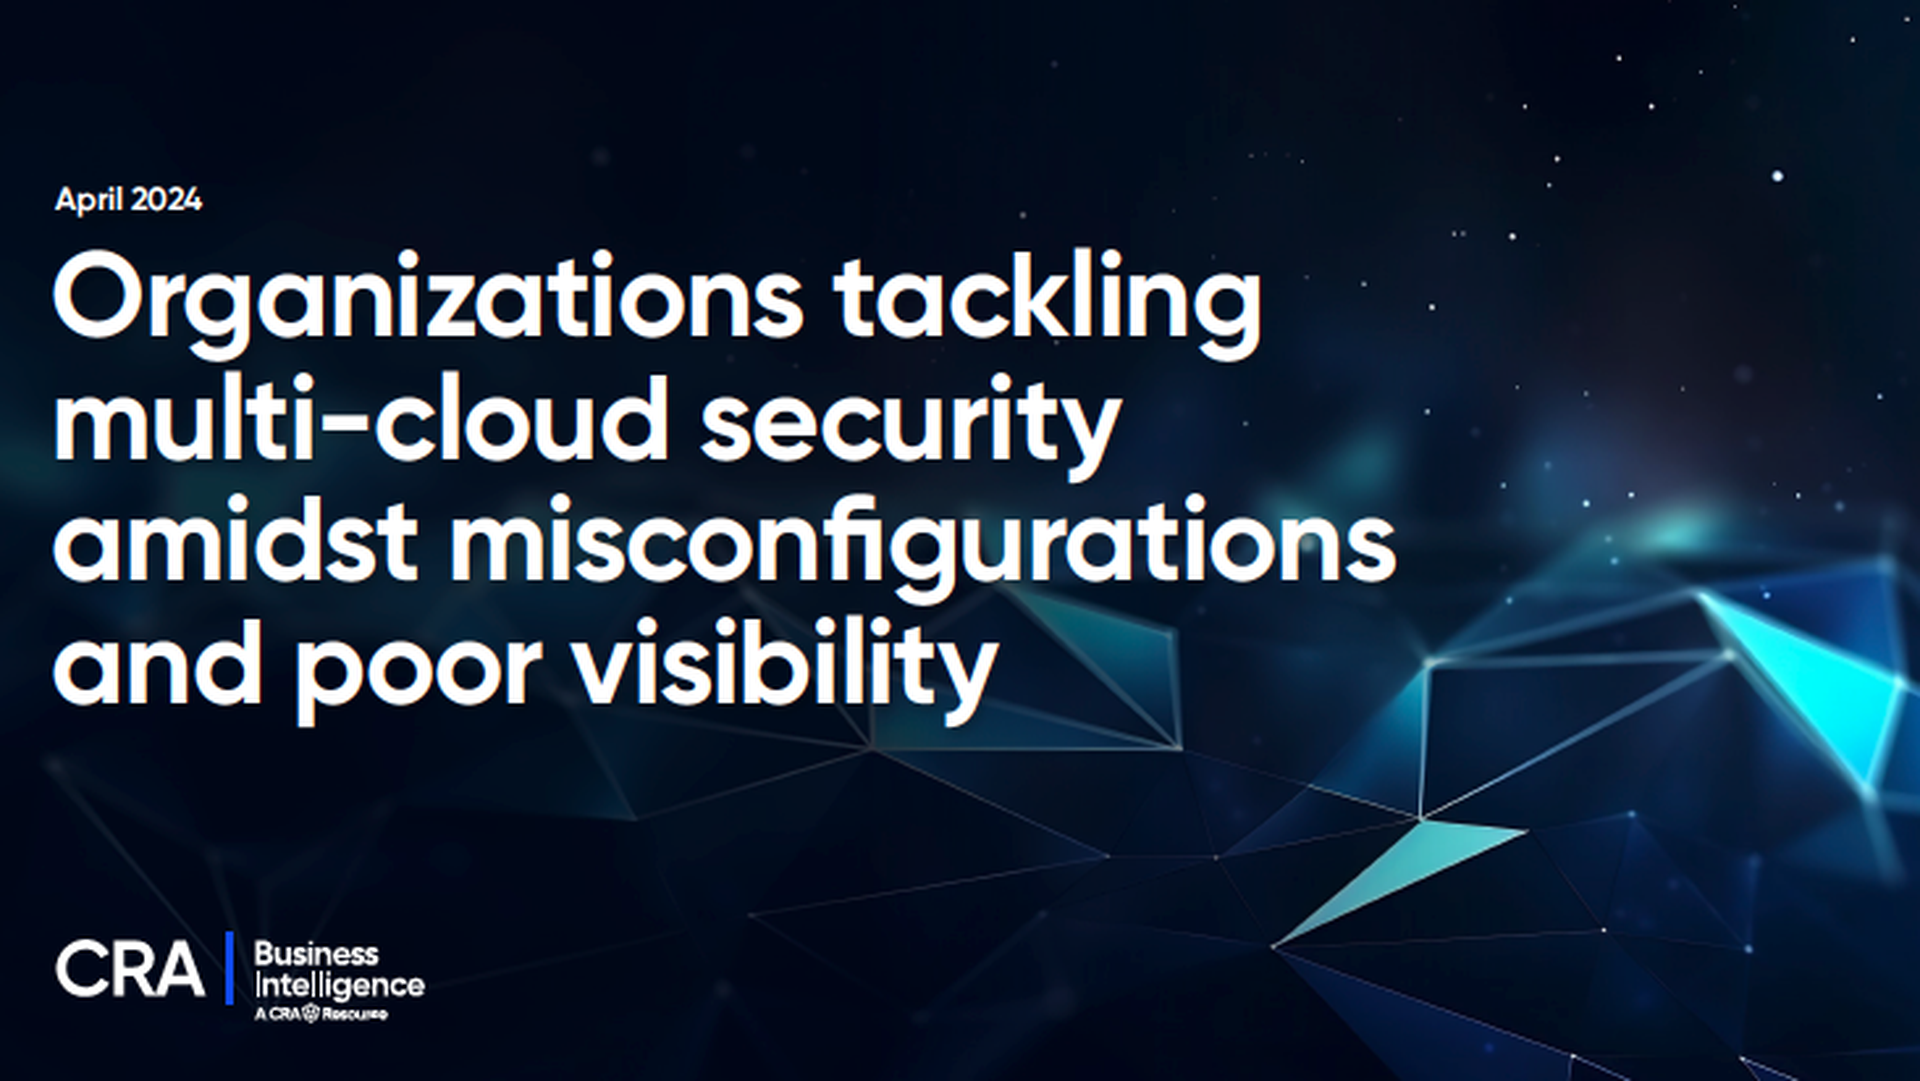 Organizations tackling multi-cloud security amidst misconfigurations and poor visibility